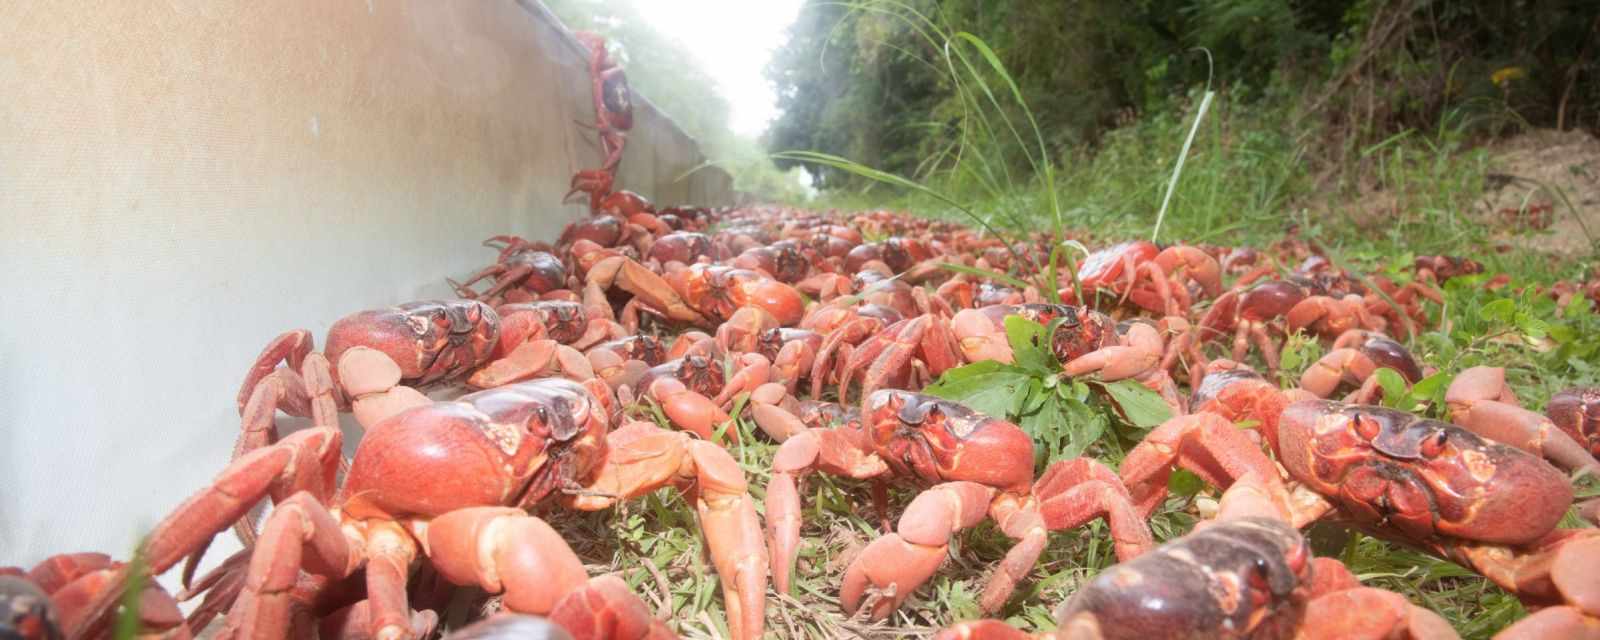 9 Facts About the Annual Crab Migration on Christmas Island